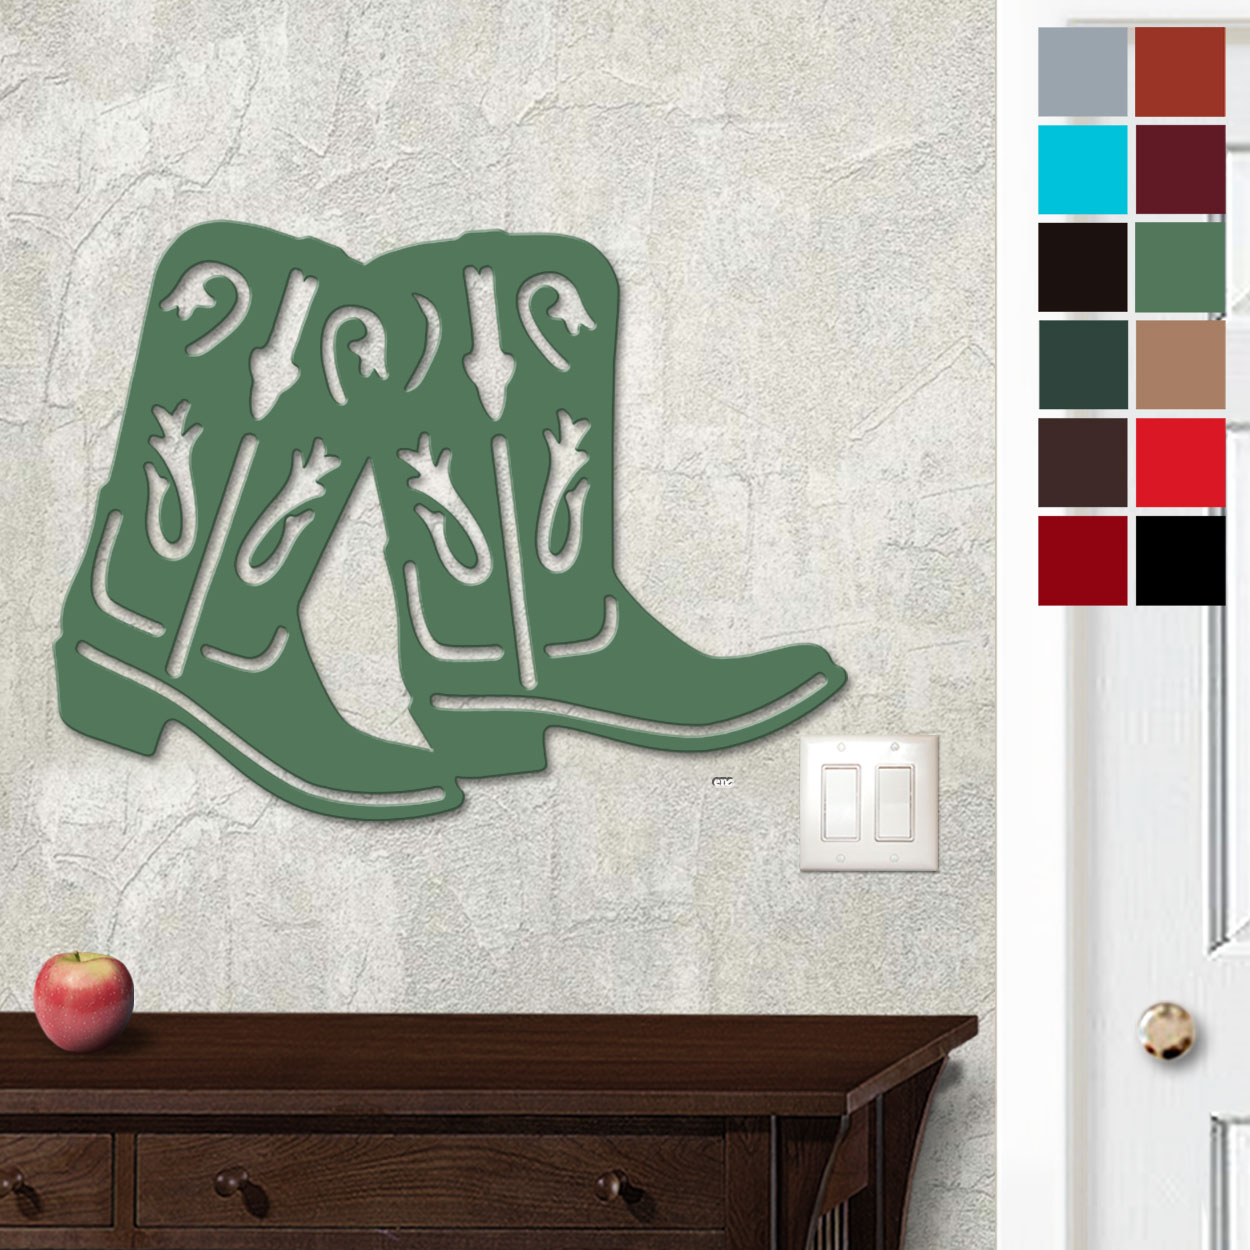 625005 - 18 or 24in Metal Wall Art - Cowboy Boots - Choose Color